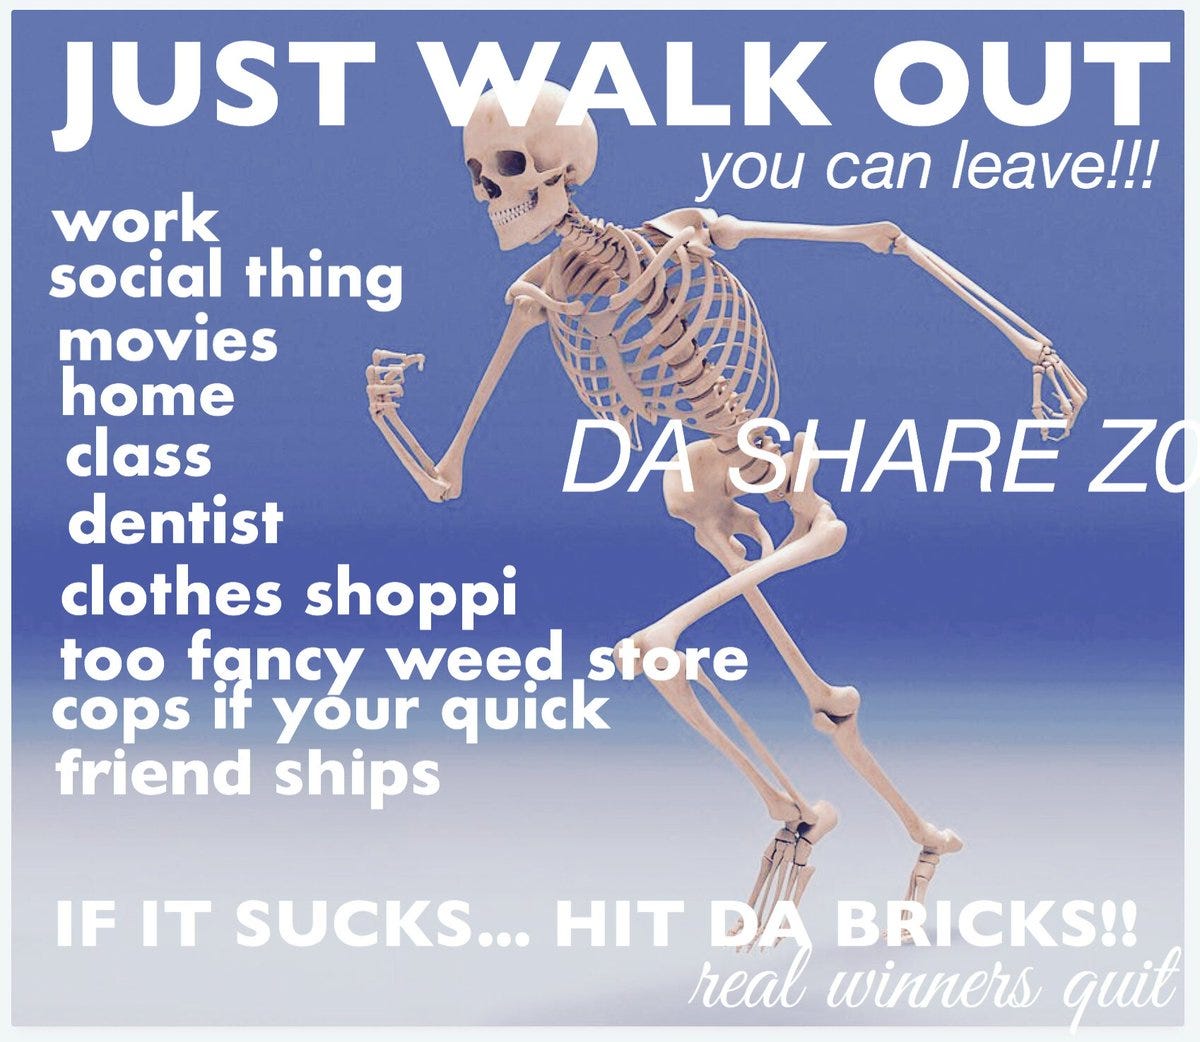 A meme from Da Share z0ne with a skeleton striding purposely and the text: “JUST WALK OUT, you can leave!!! work, social thing, movies, home, class, dentist, clothes shoppi, too fancy weed store, cops if your quick, friend ships… if it sucks, hit da bricks! Real winners quit.